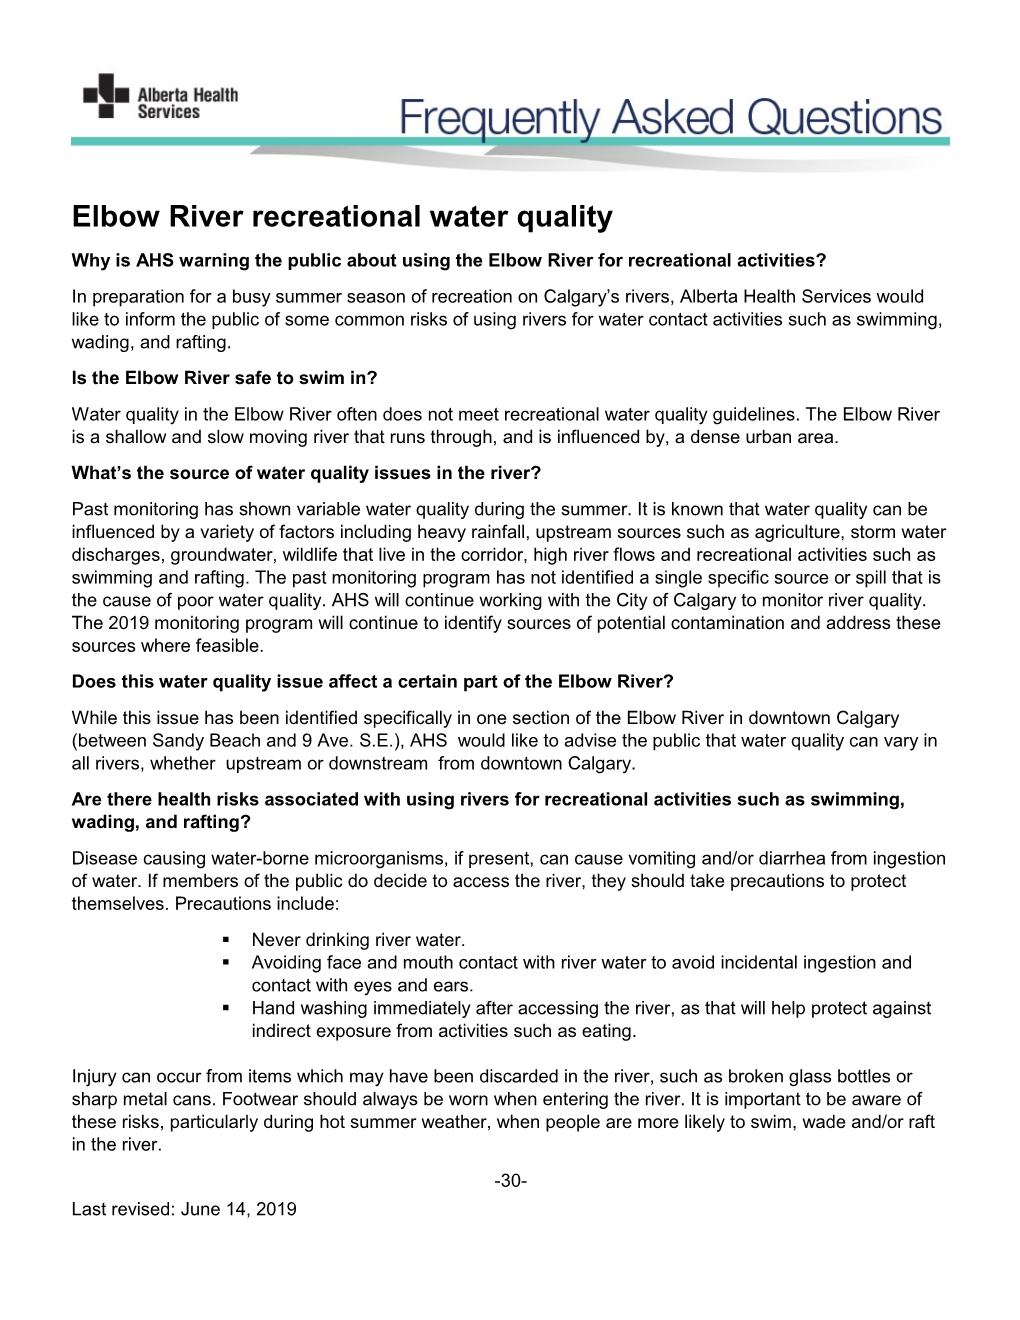 Elbow River Recreational Water Quality